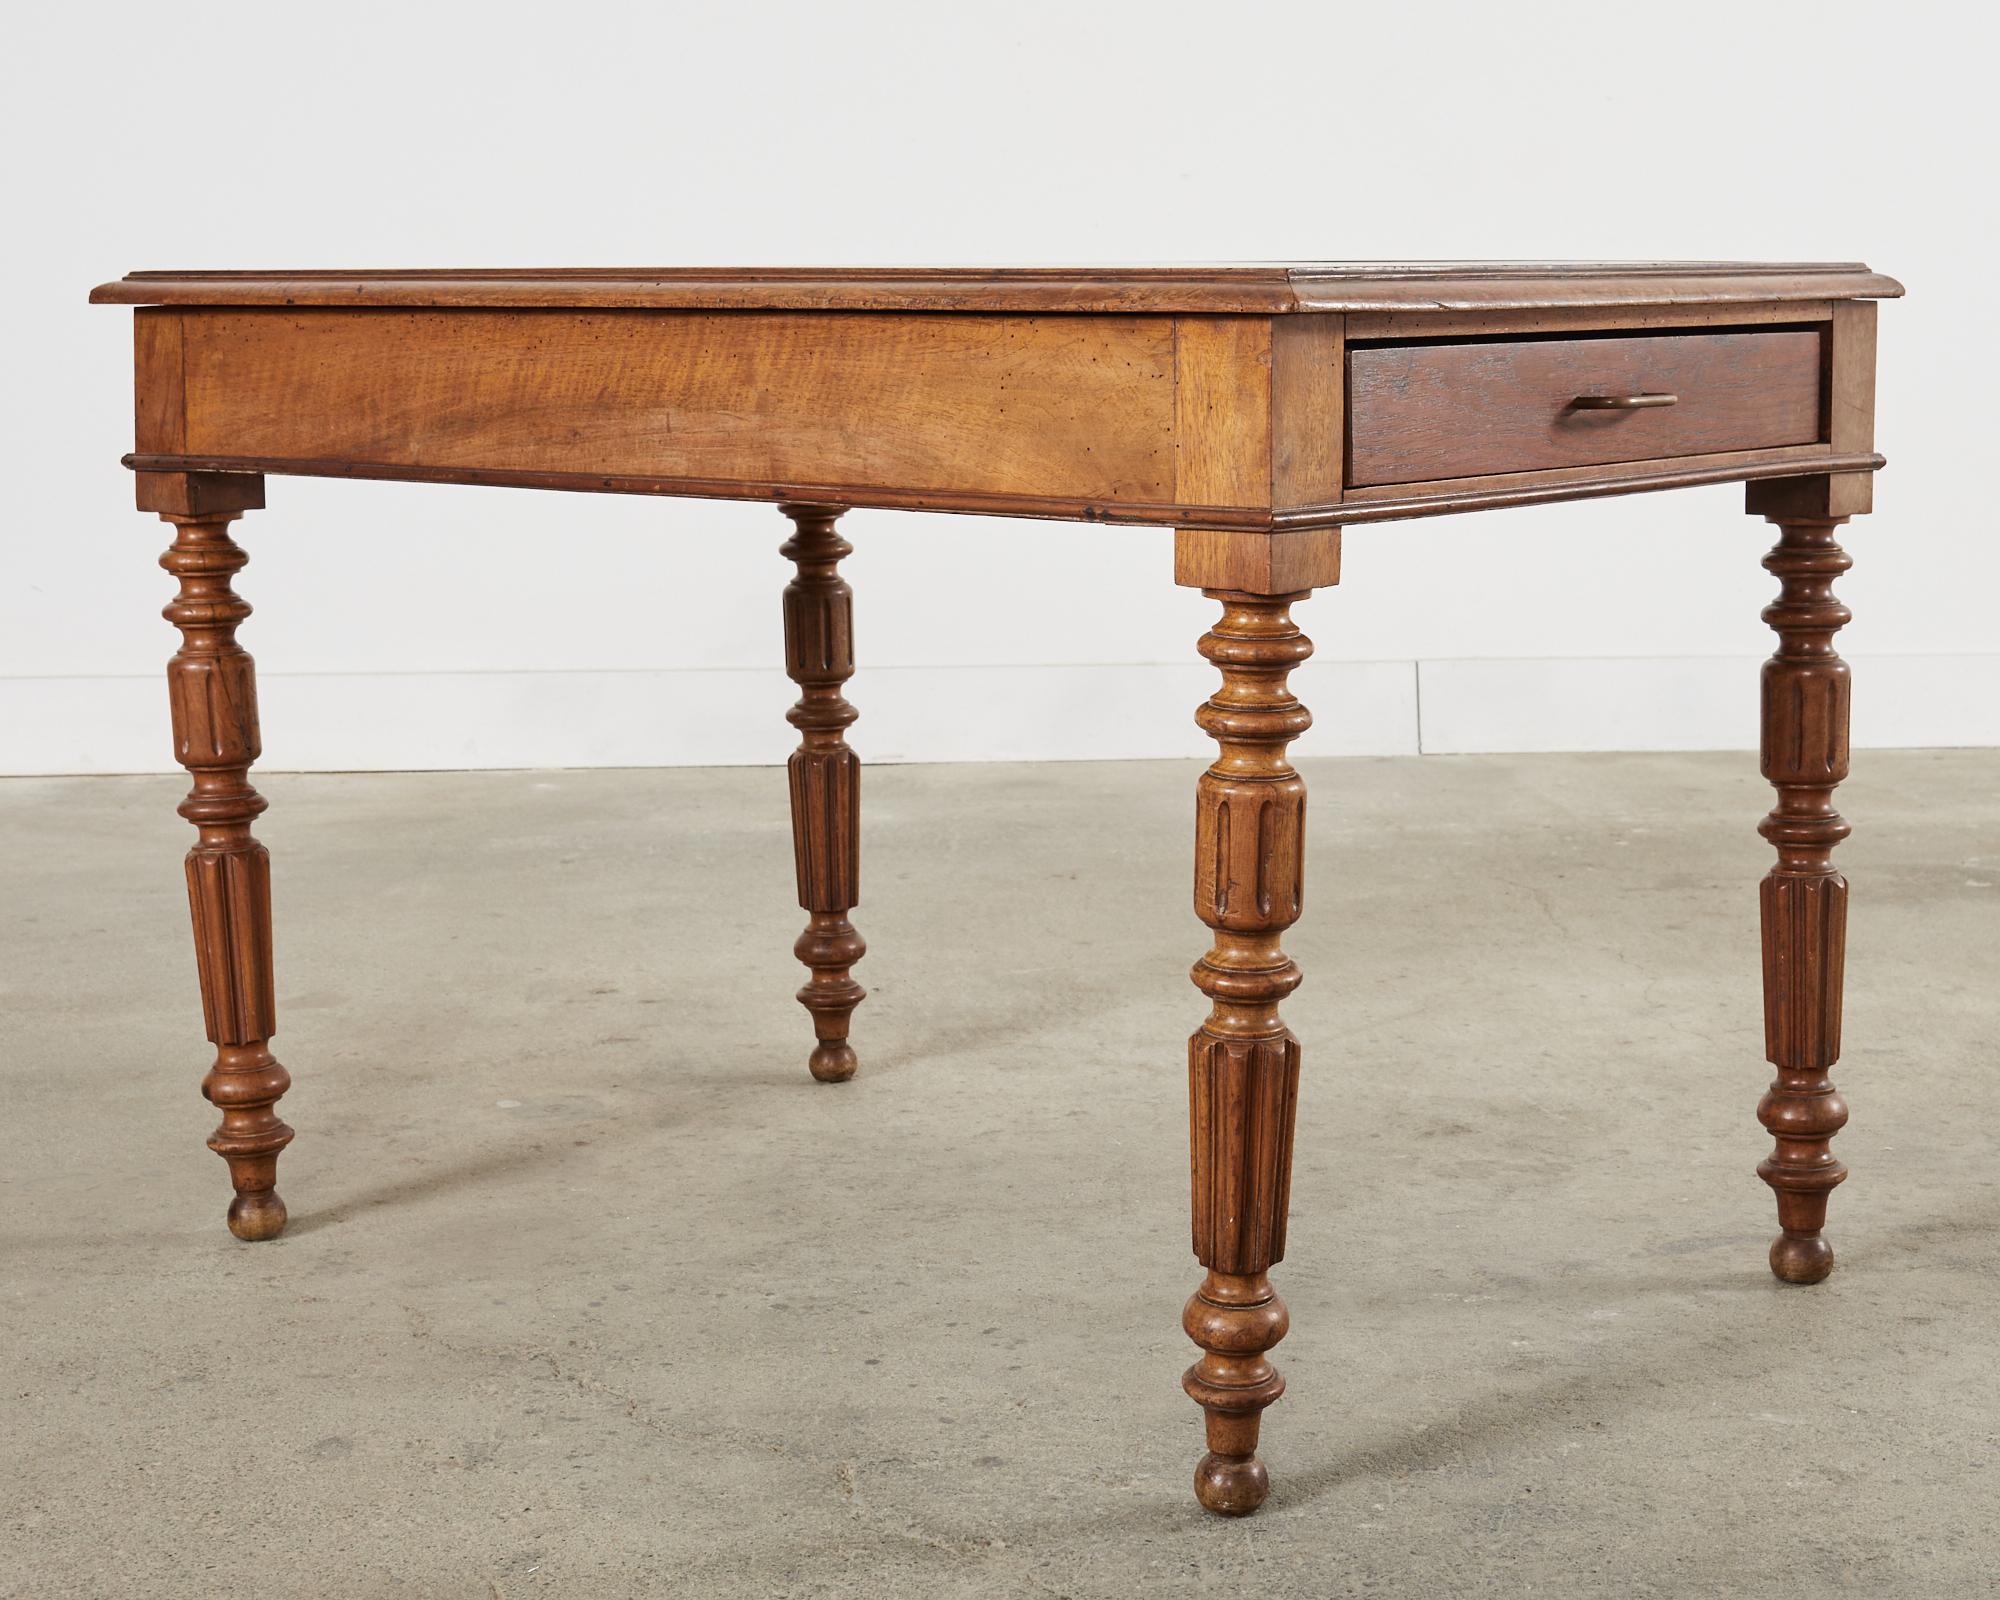 Hand-Crafted 19th Century English William IV Fruitwood Writing Table or Desk For Sale